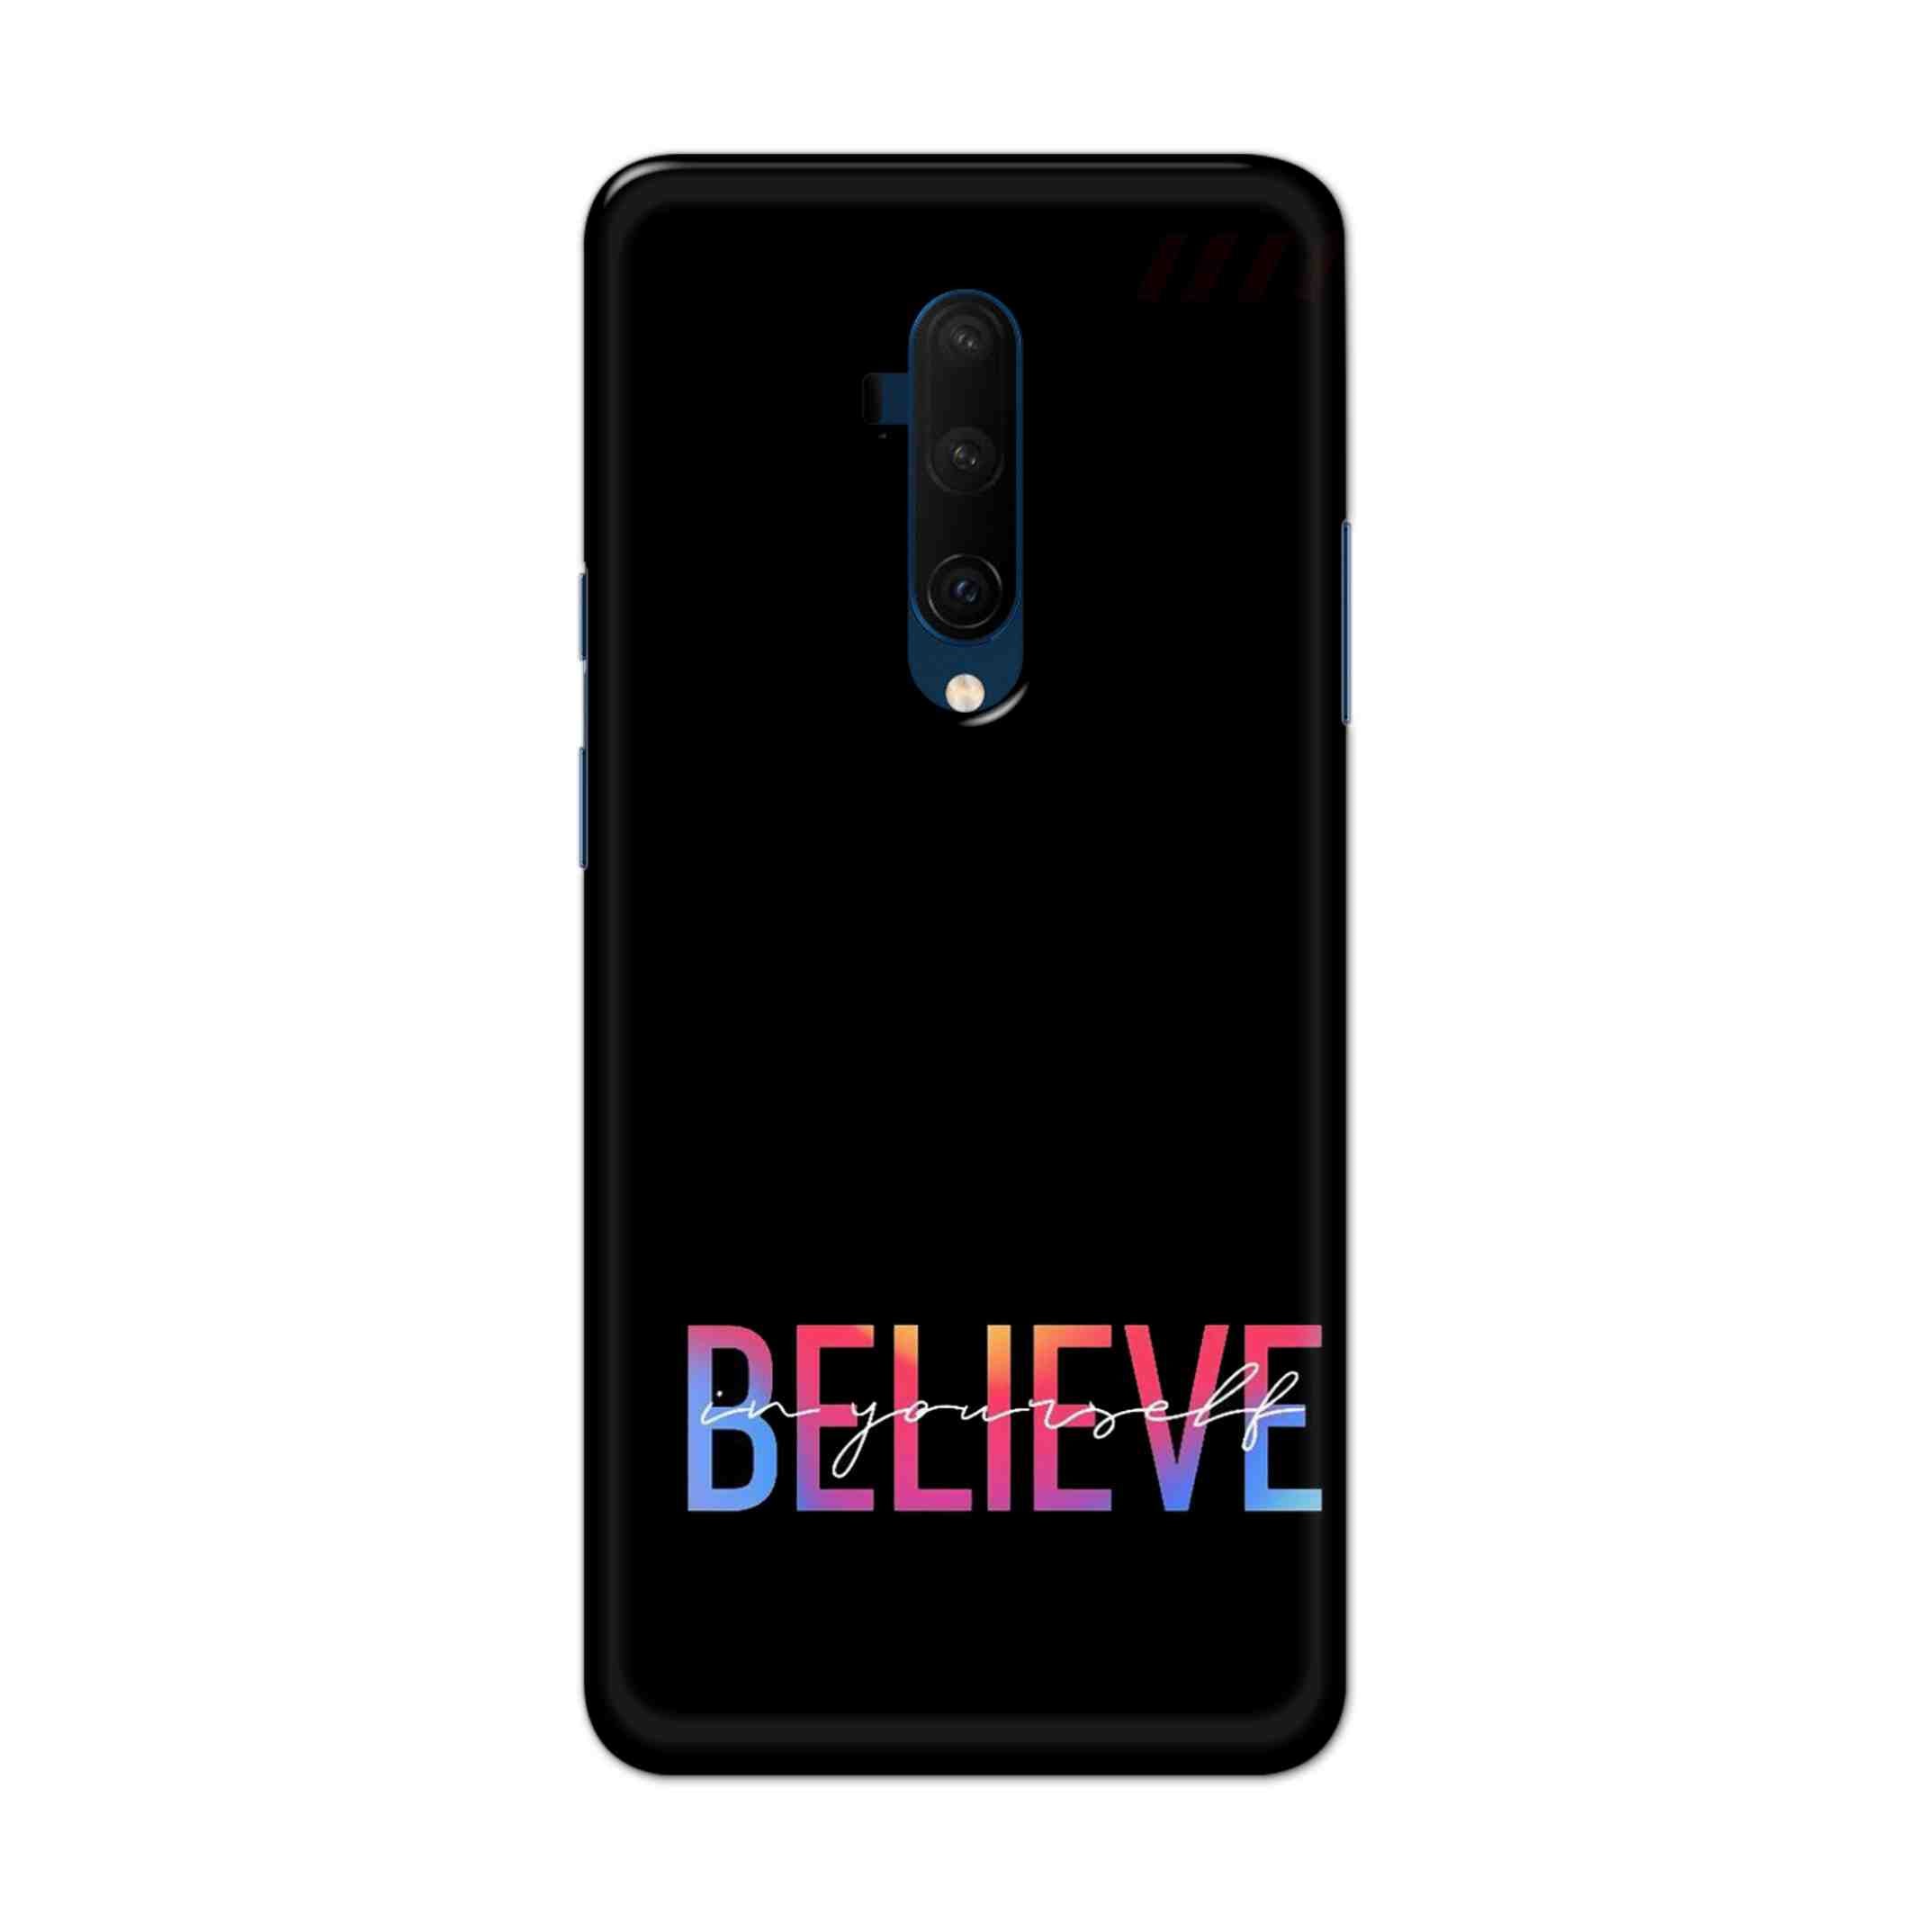 Buy Believe Hard Back Mobile Phone Case Cover For OnePlus 7T Pro Online